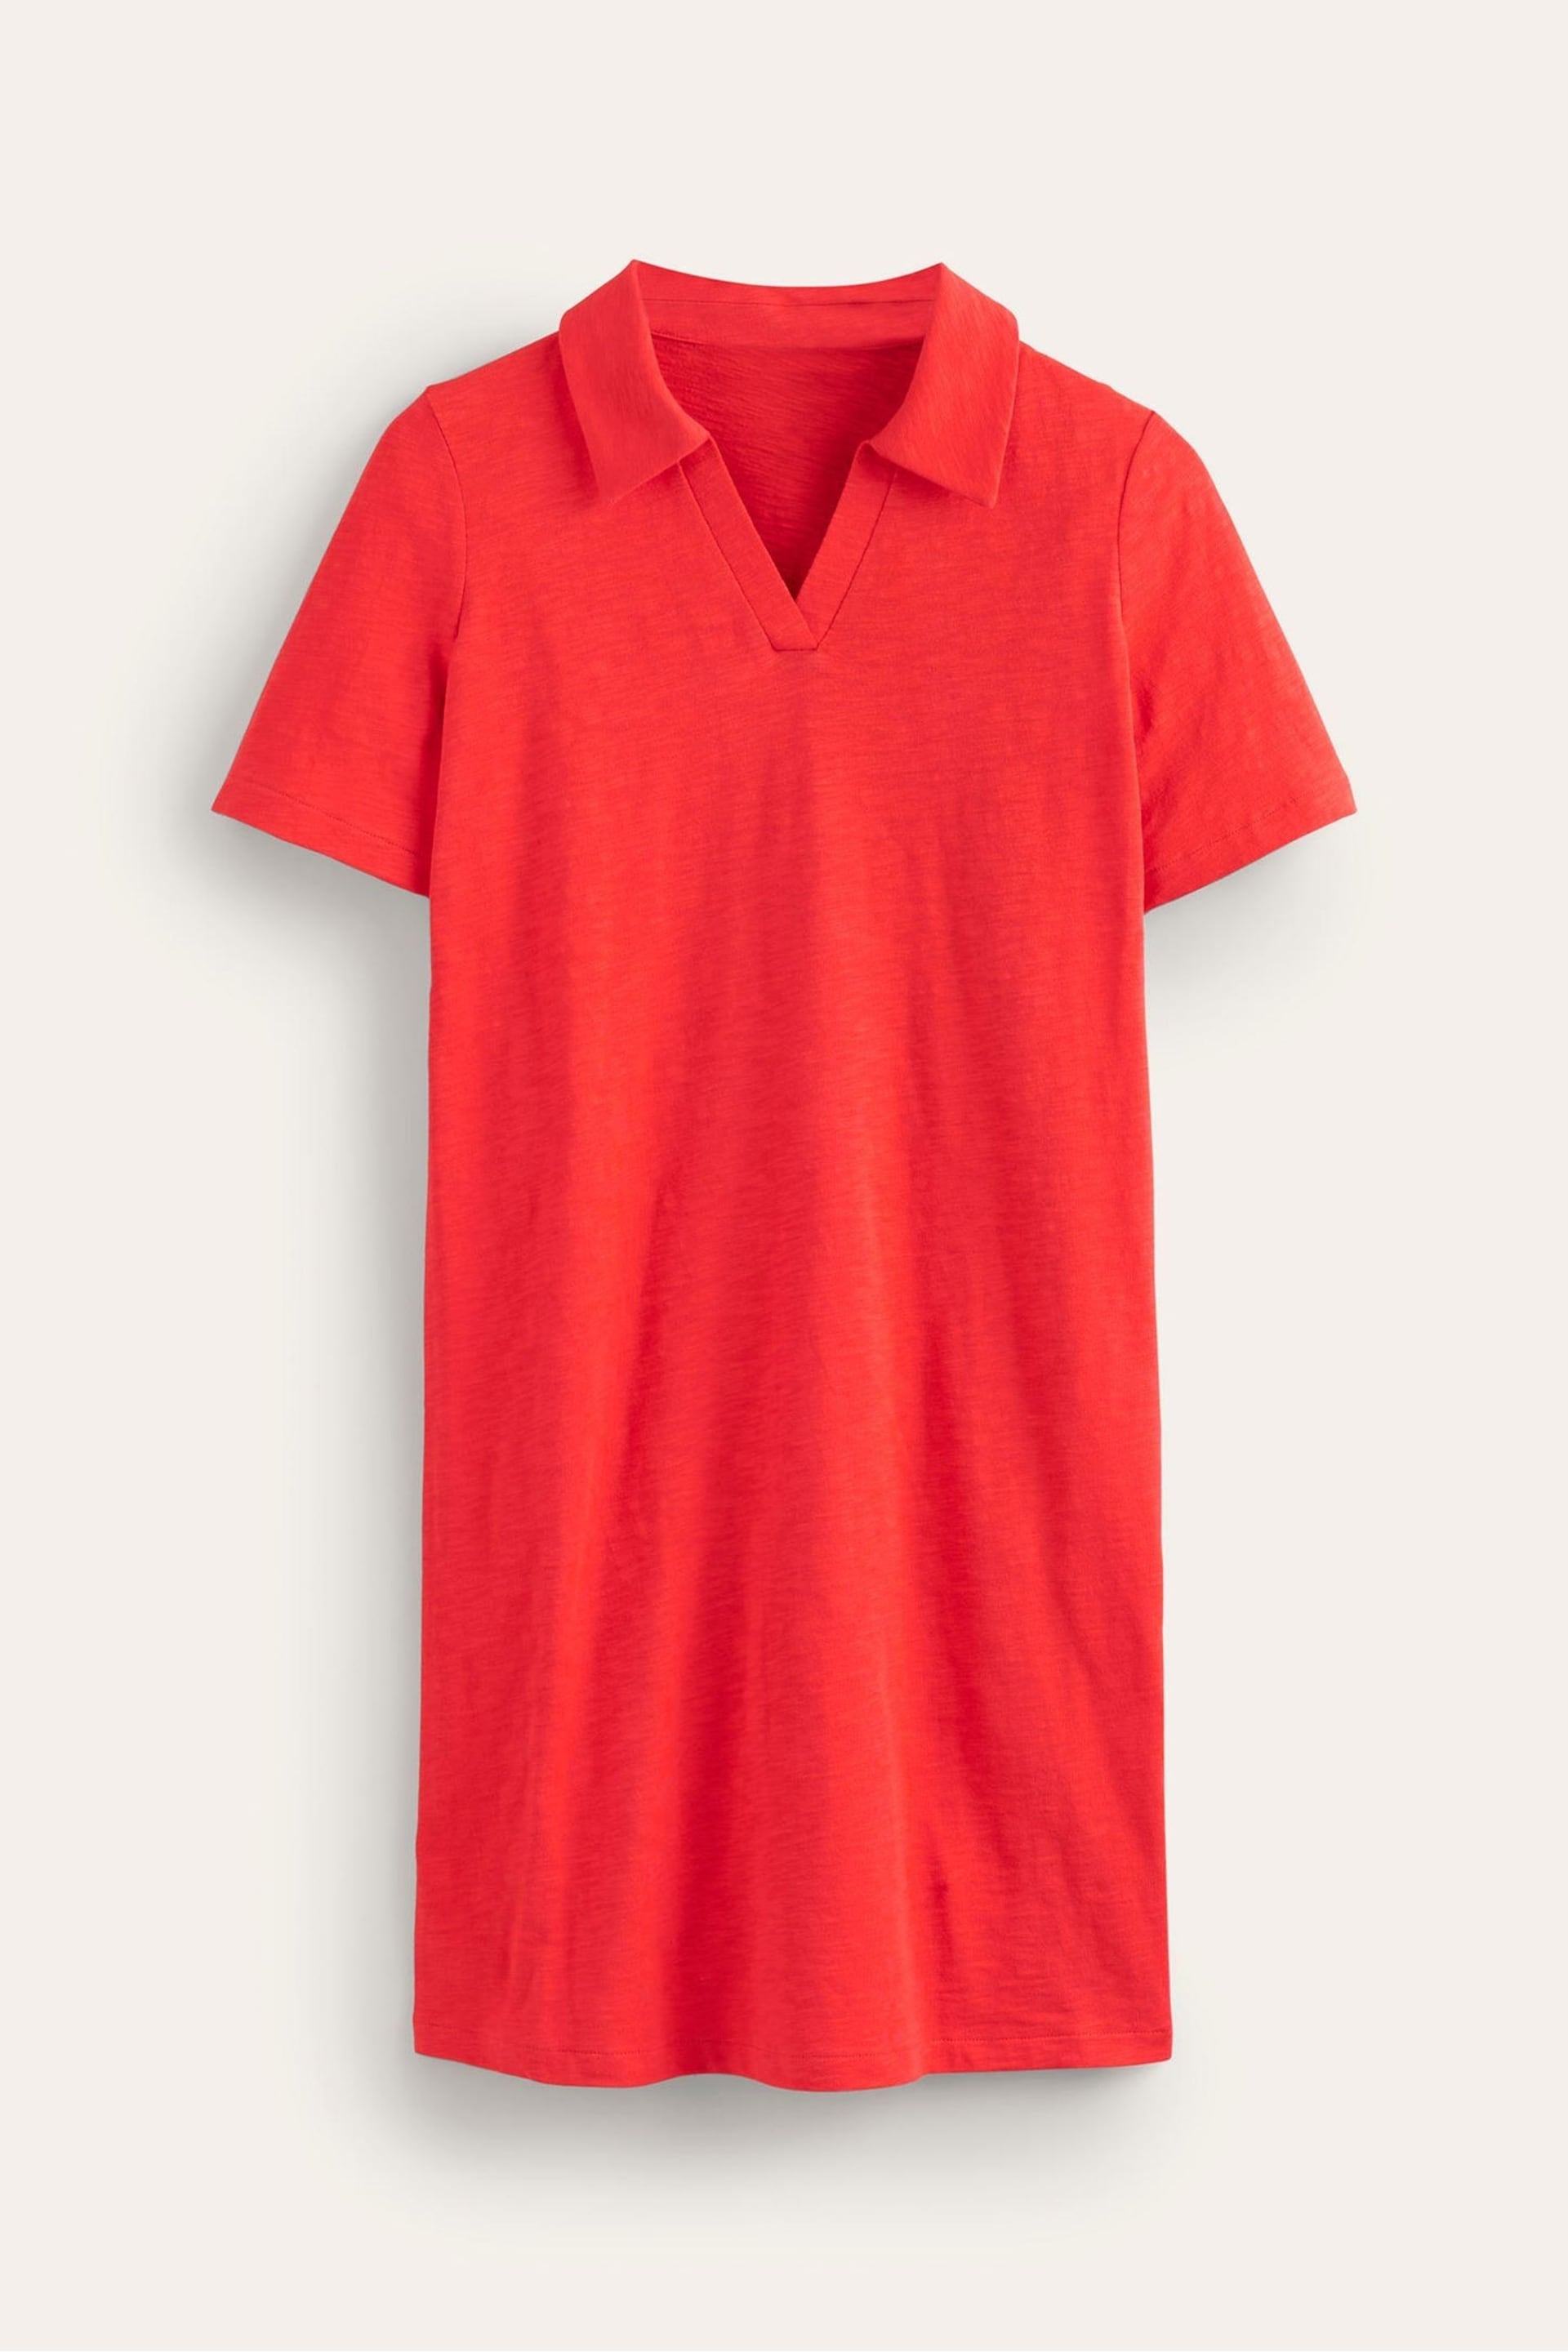 Boden Red Ingrid Polo Cotton Dress - Image 5 of 5